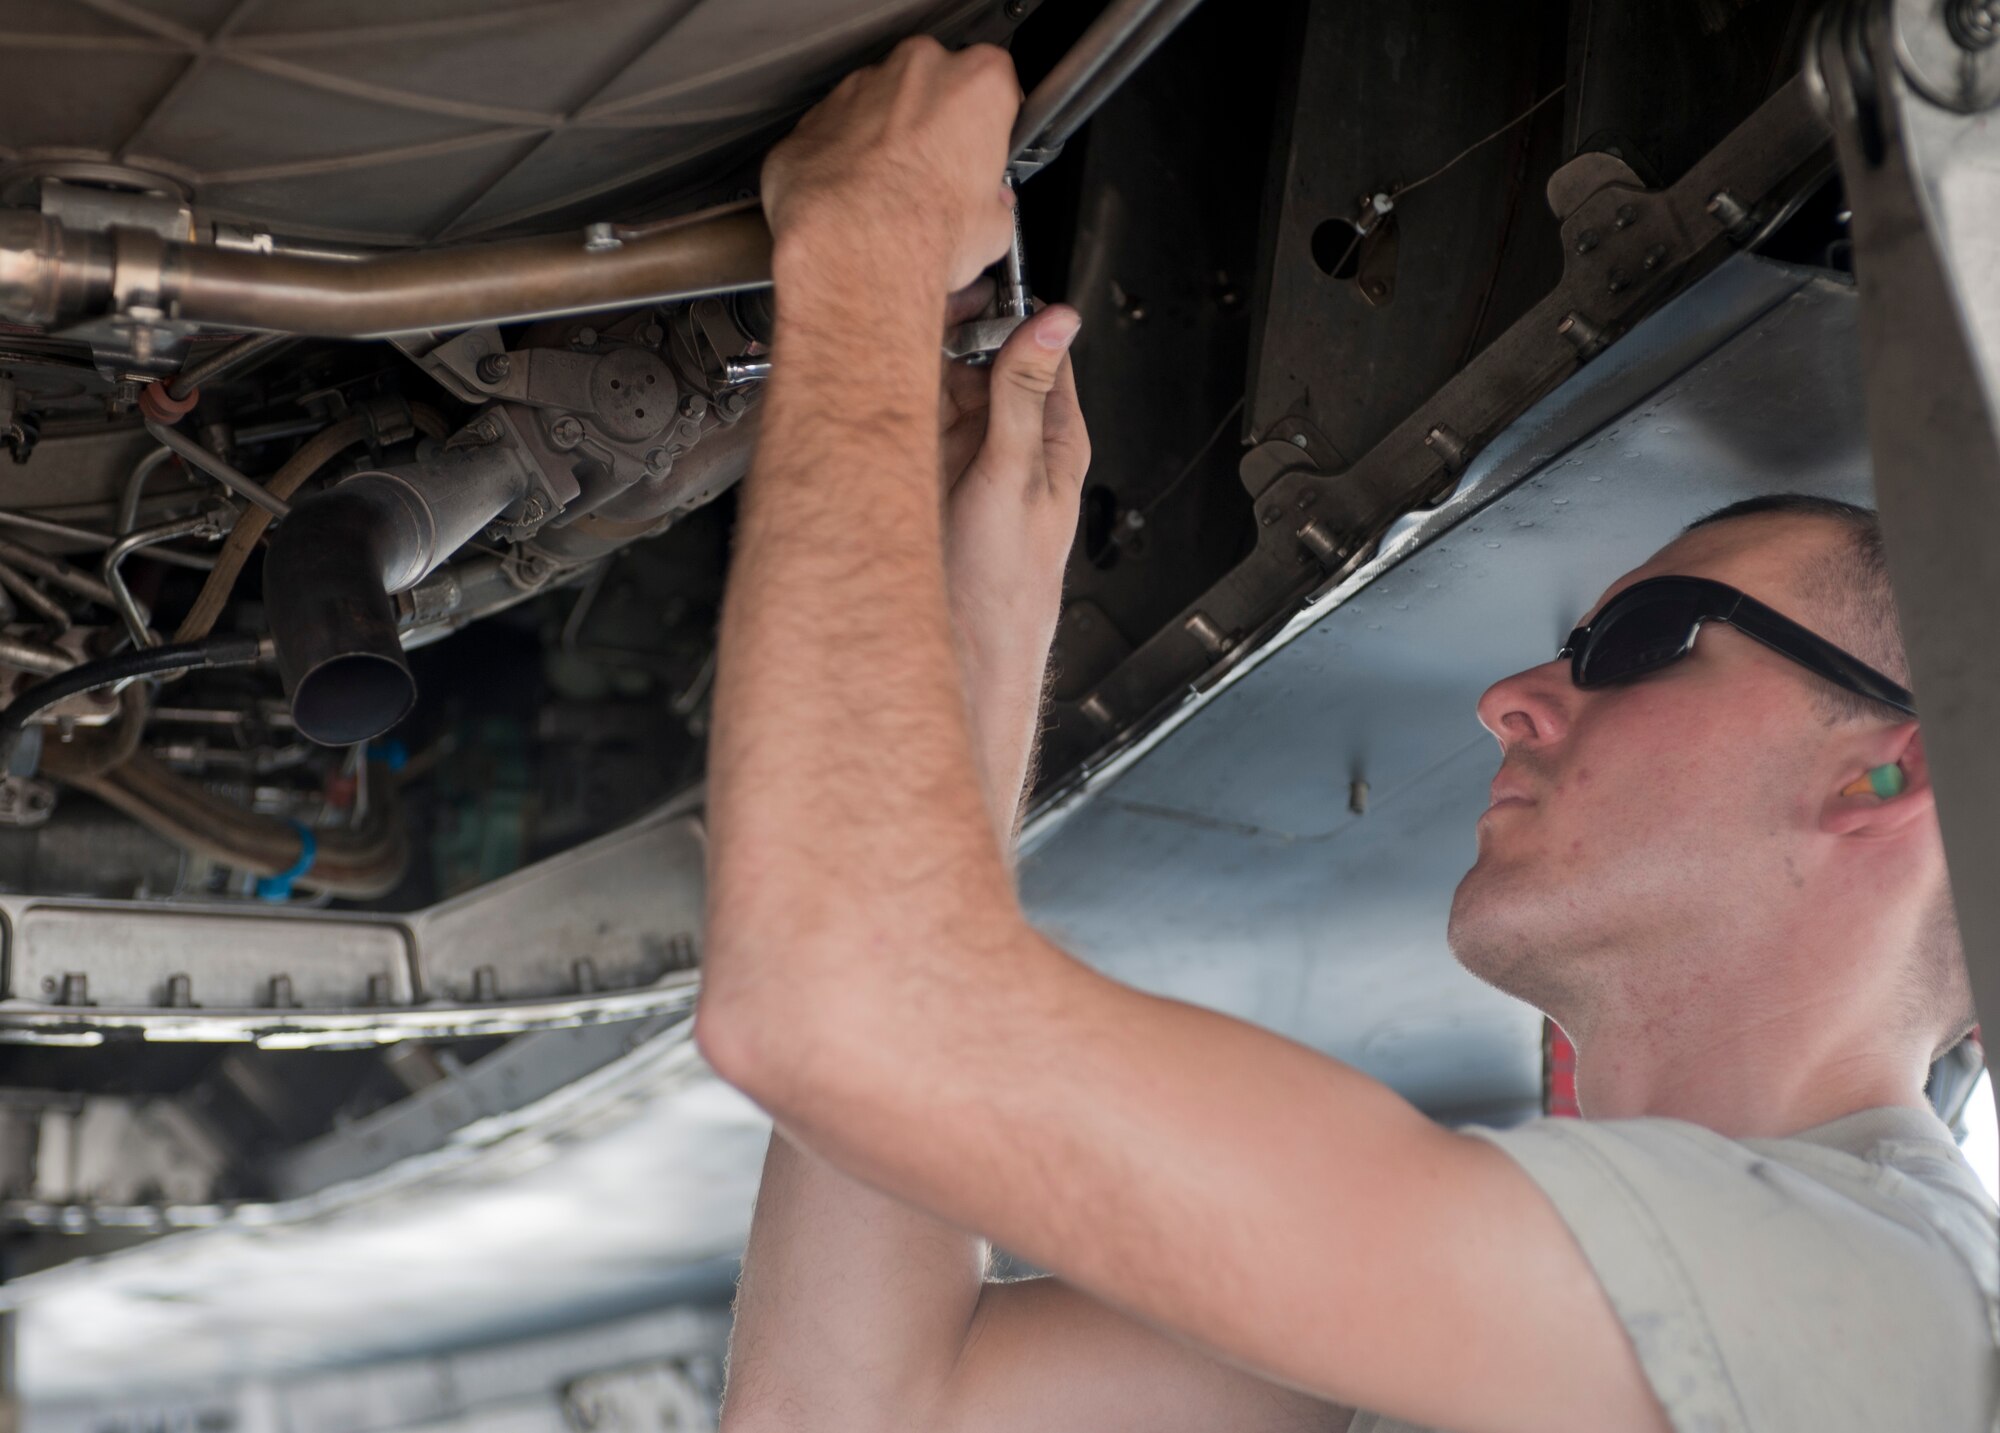 Senior Airman Shawn Lawson, 757th Aircraft Maintenance Squadron Strike Aircraft Maintenance Unit engine specialist, installs a flex strap on an F-15E Strike Eagle on the flightline at Nellis Air Force Base, Nev., Aug. 19, 2015. Strike AMU has approximately 170 Airmen working on 16 Strike Eagles. (U.S. Air Force photo by Airman 1st Class Mikaley Towle)